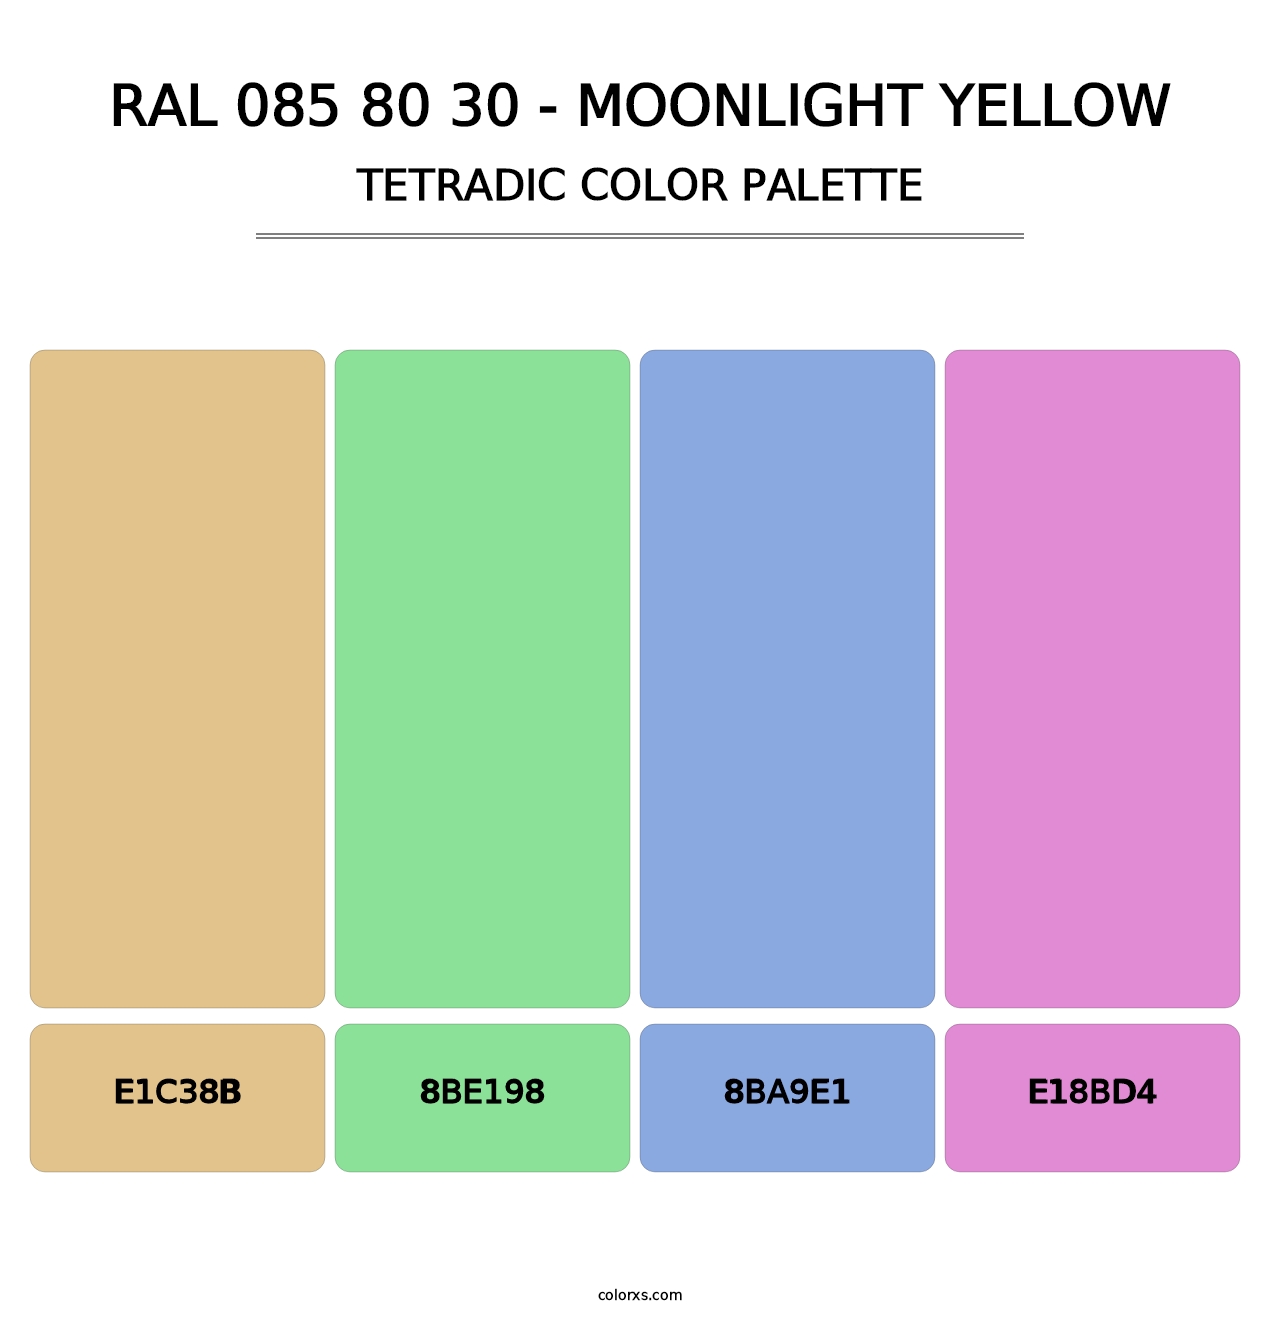 RAL 085 80 30 - Moonlight Yellow - Tetradic Color Palette